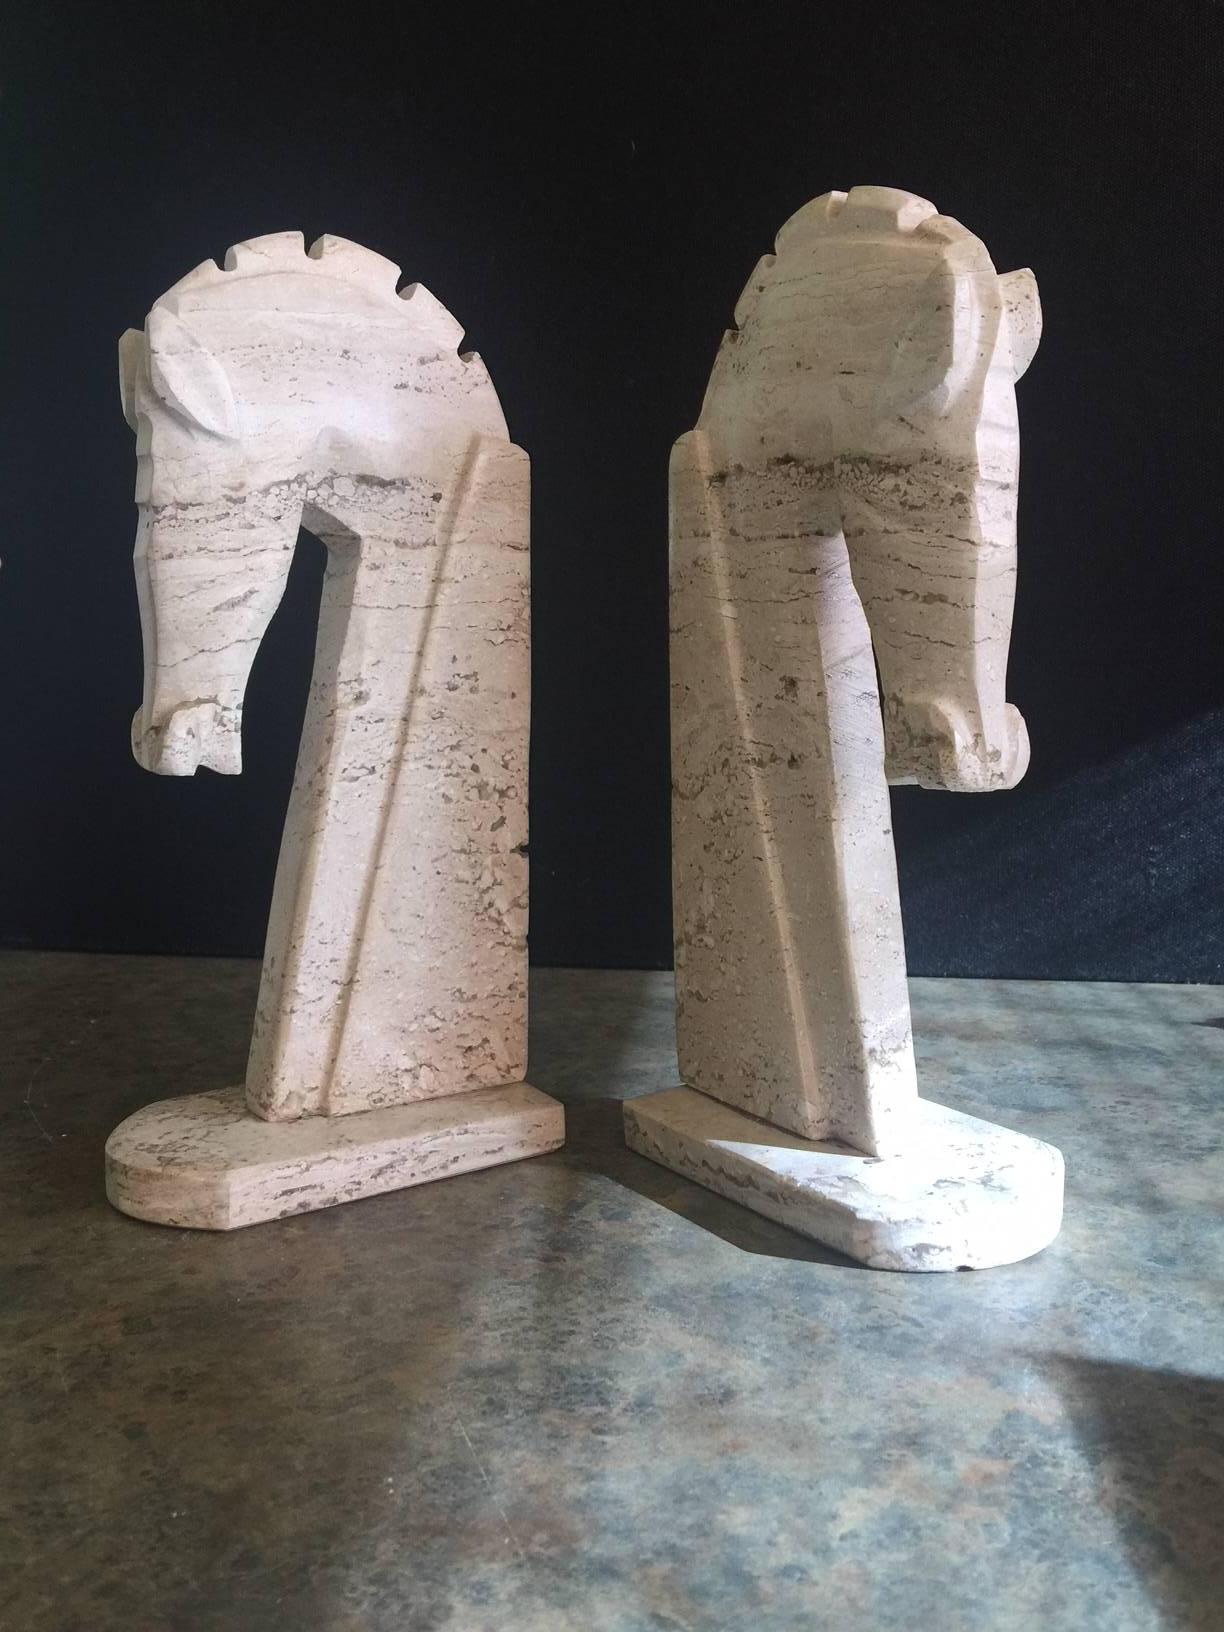 Very stylish pair of mid-century Italian travertine horse head bookends, circa 1970's. The bookends are heavy and solid and well crafted. They wold make a great addition to any office or den.